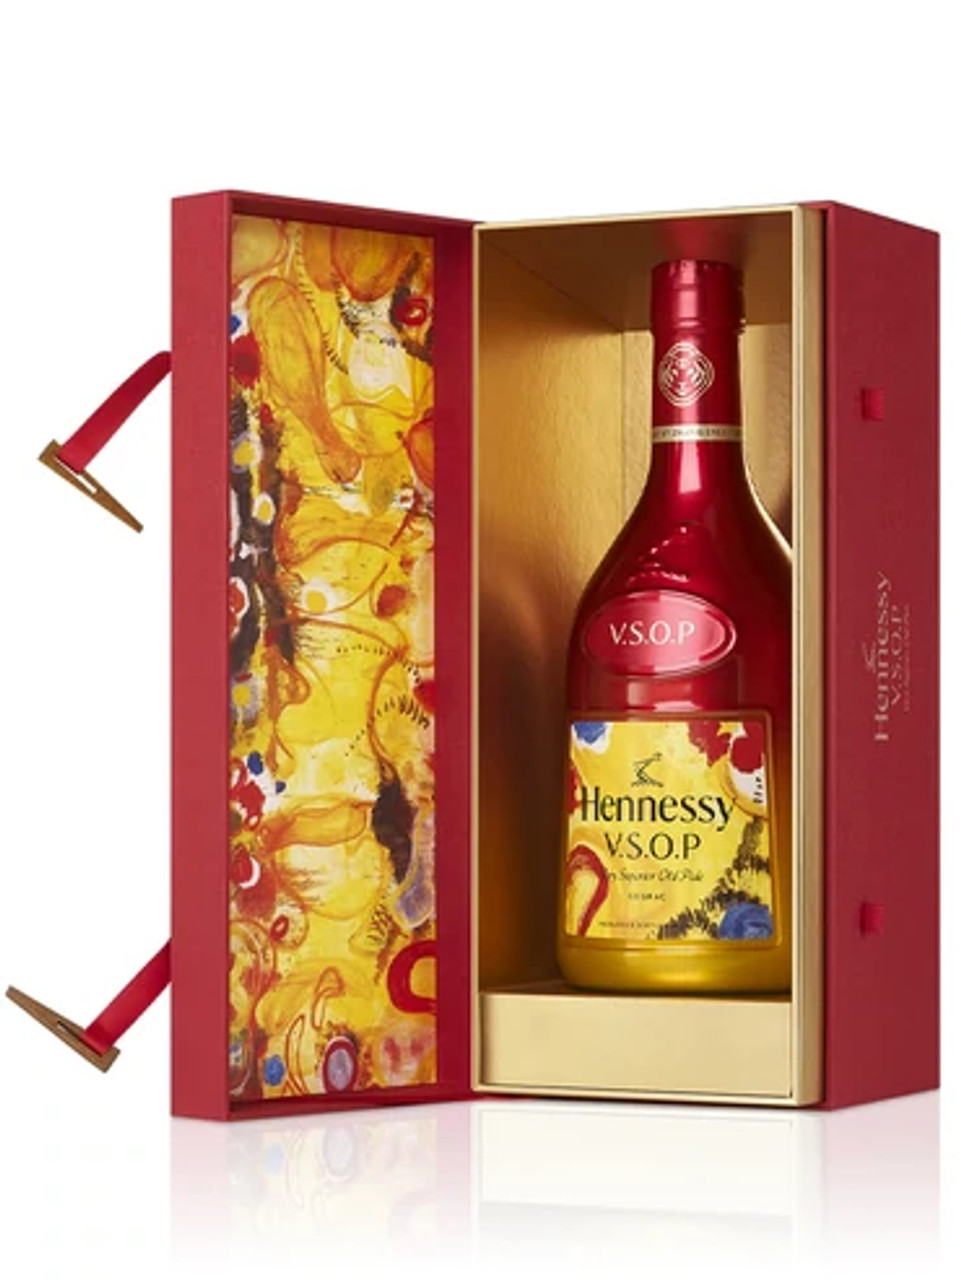 Moët Hennessy, the world leader in luxury wines and spirits is